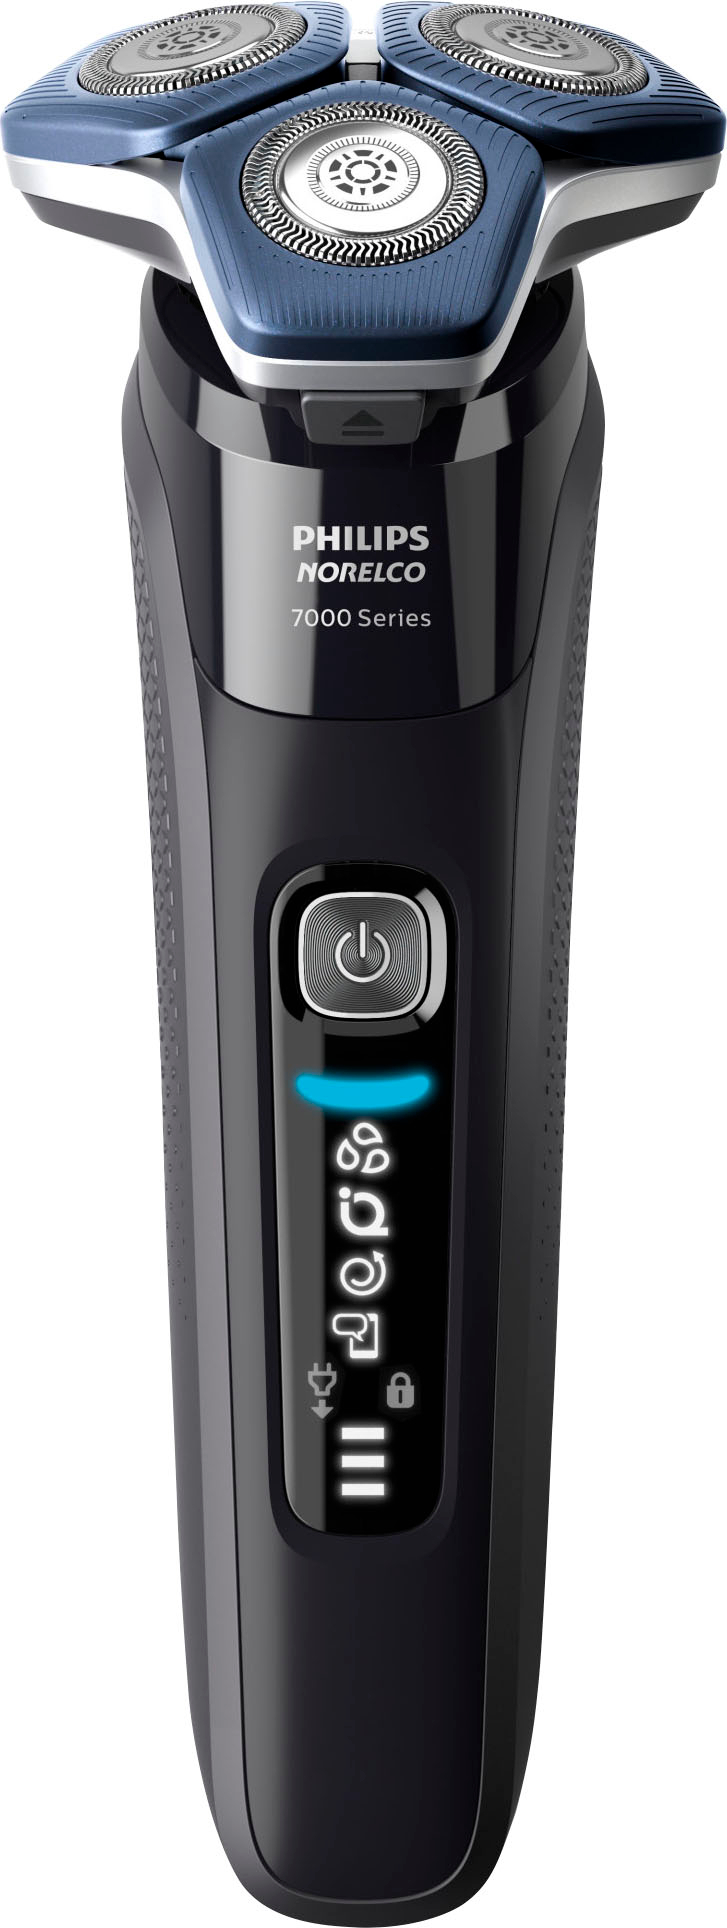 Norelco Shaver 7800, Rechargeable Wet ＆ Dry Electric Shaver with SenseIQ Technology, Quick Clean Pod, Charging Stand, Travel Case and Pop-up Trimmer,